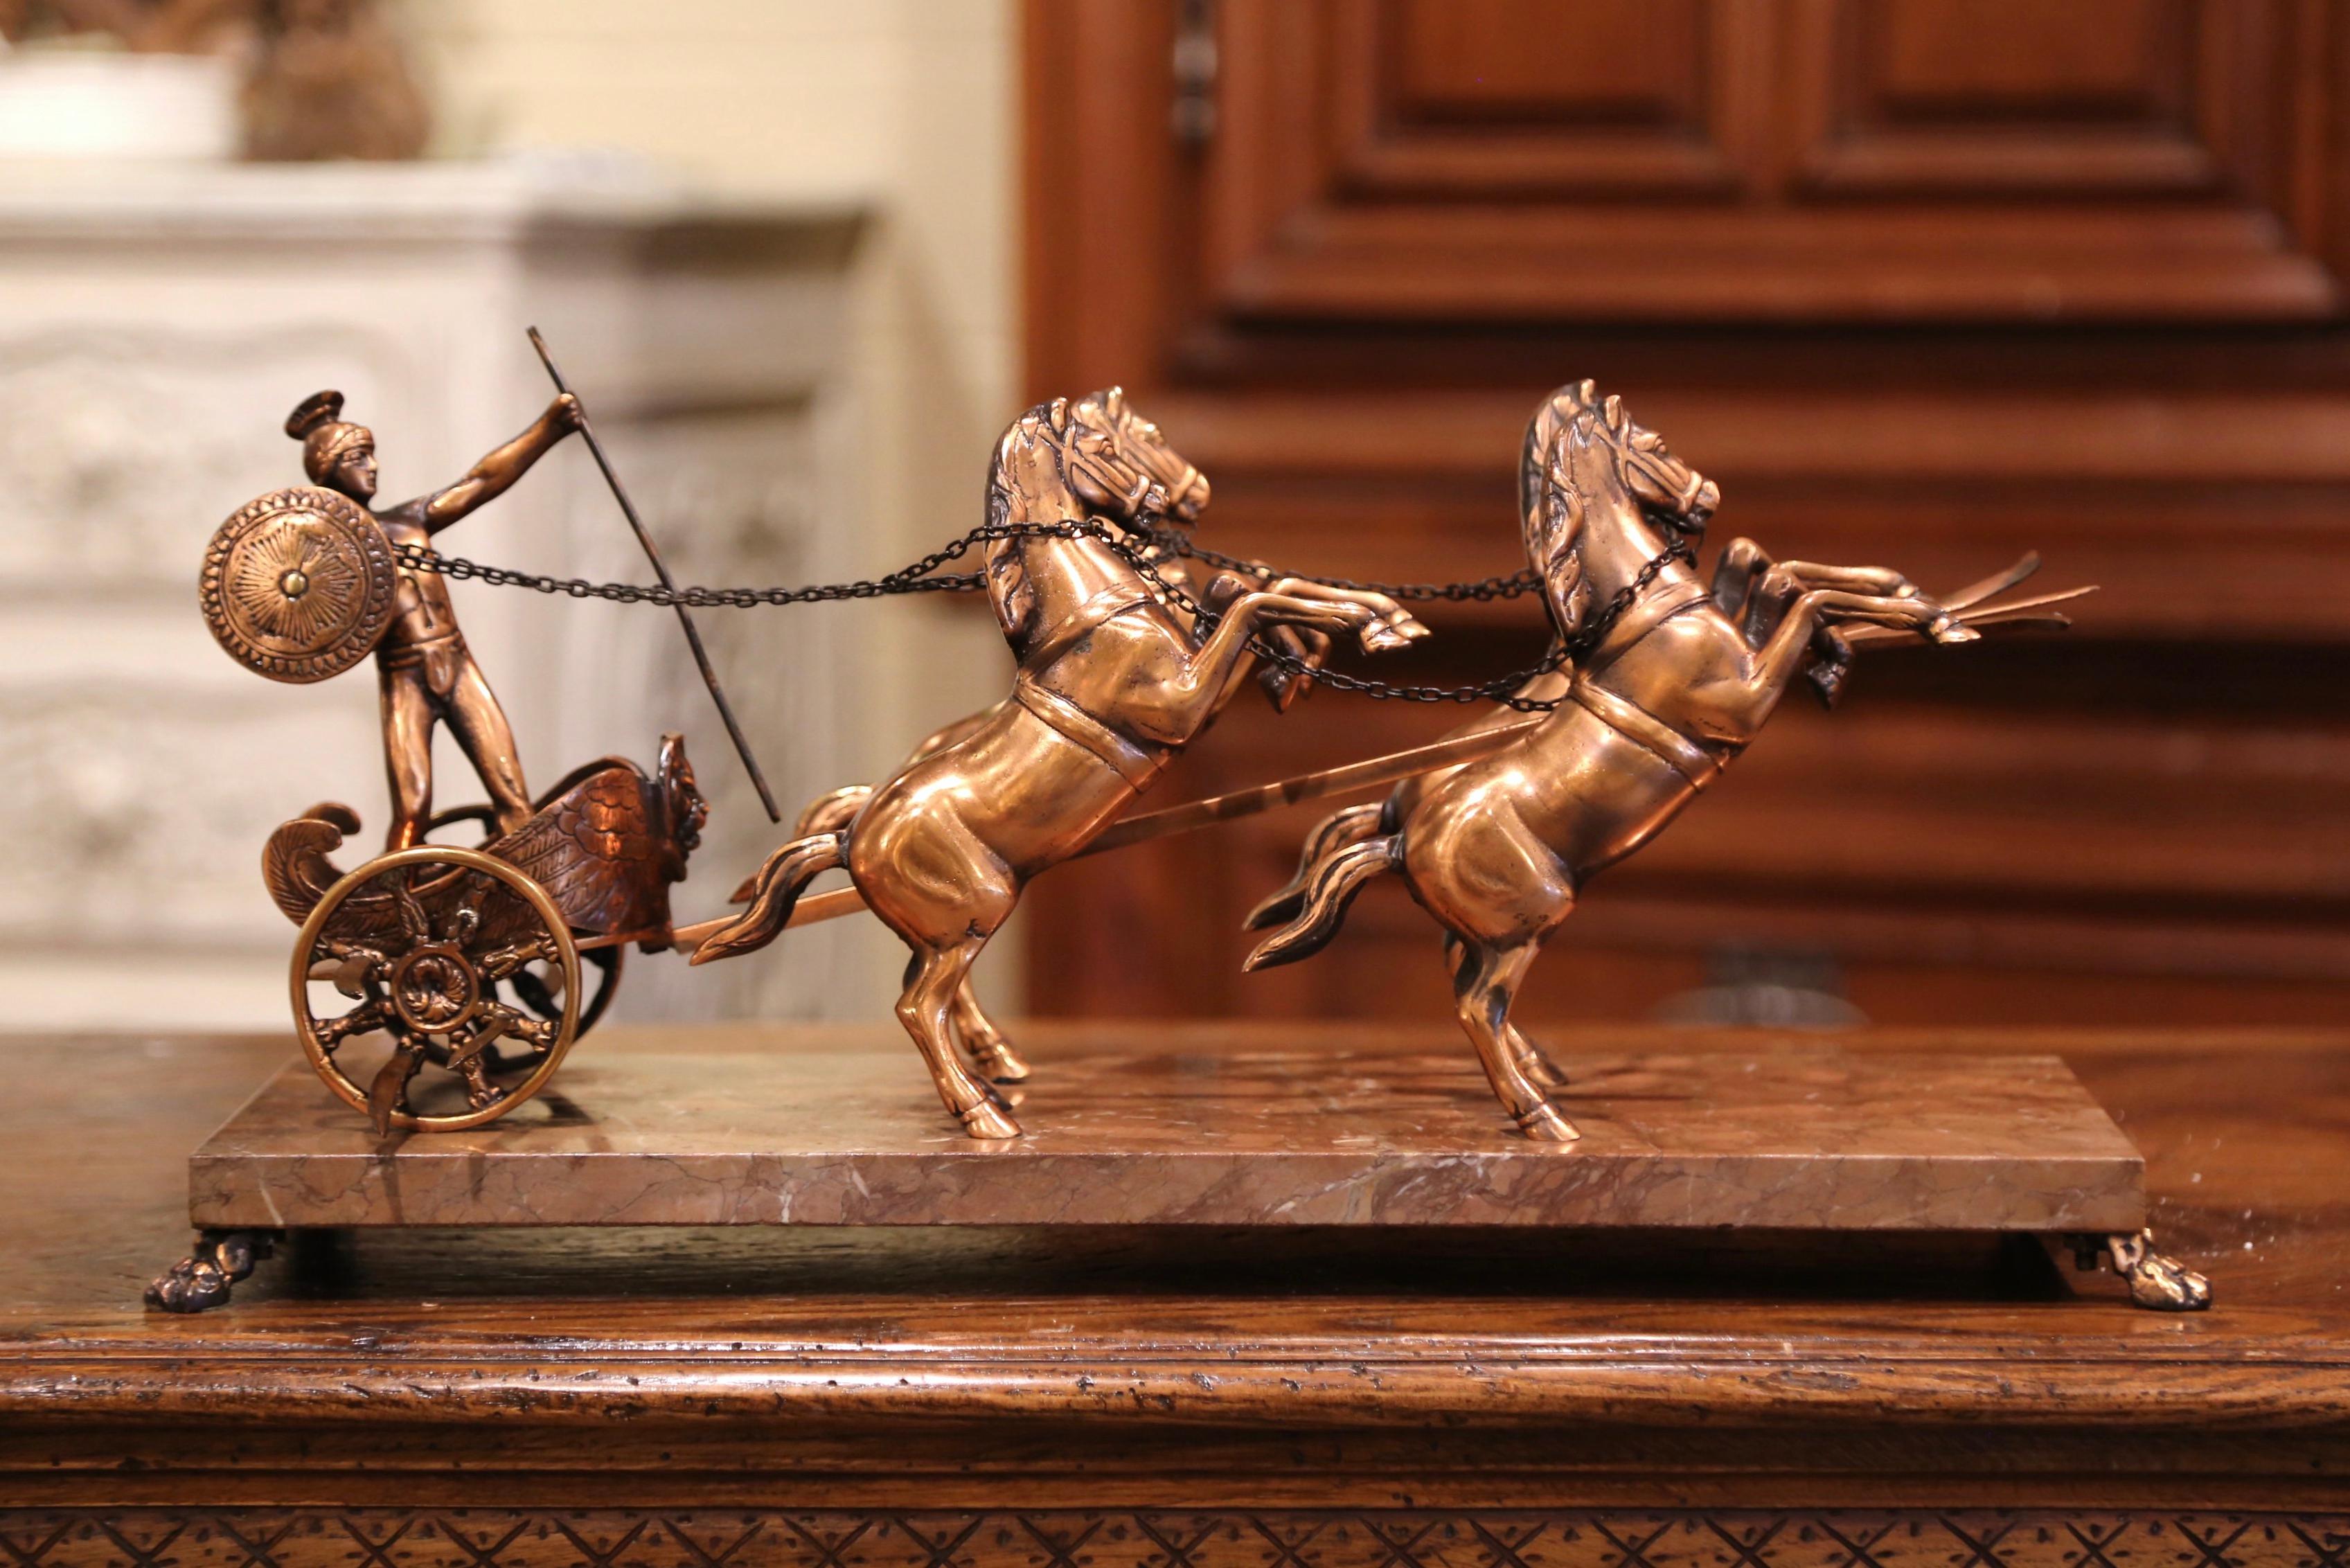 Decorate a study or office shelf with this interesting Roman Empire chariot composition; crafted in France circa 1950, the sculpture depicts a copper and brass racing chariot pulled by four elegant horses, with a Roman soldier standing inside the